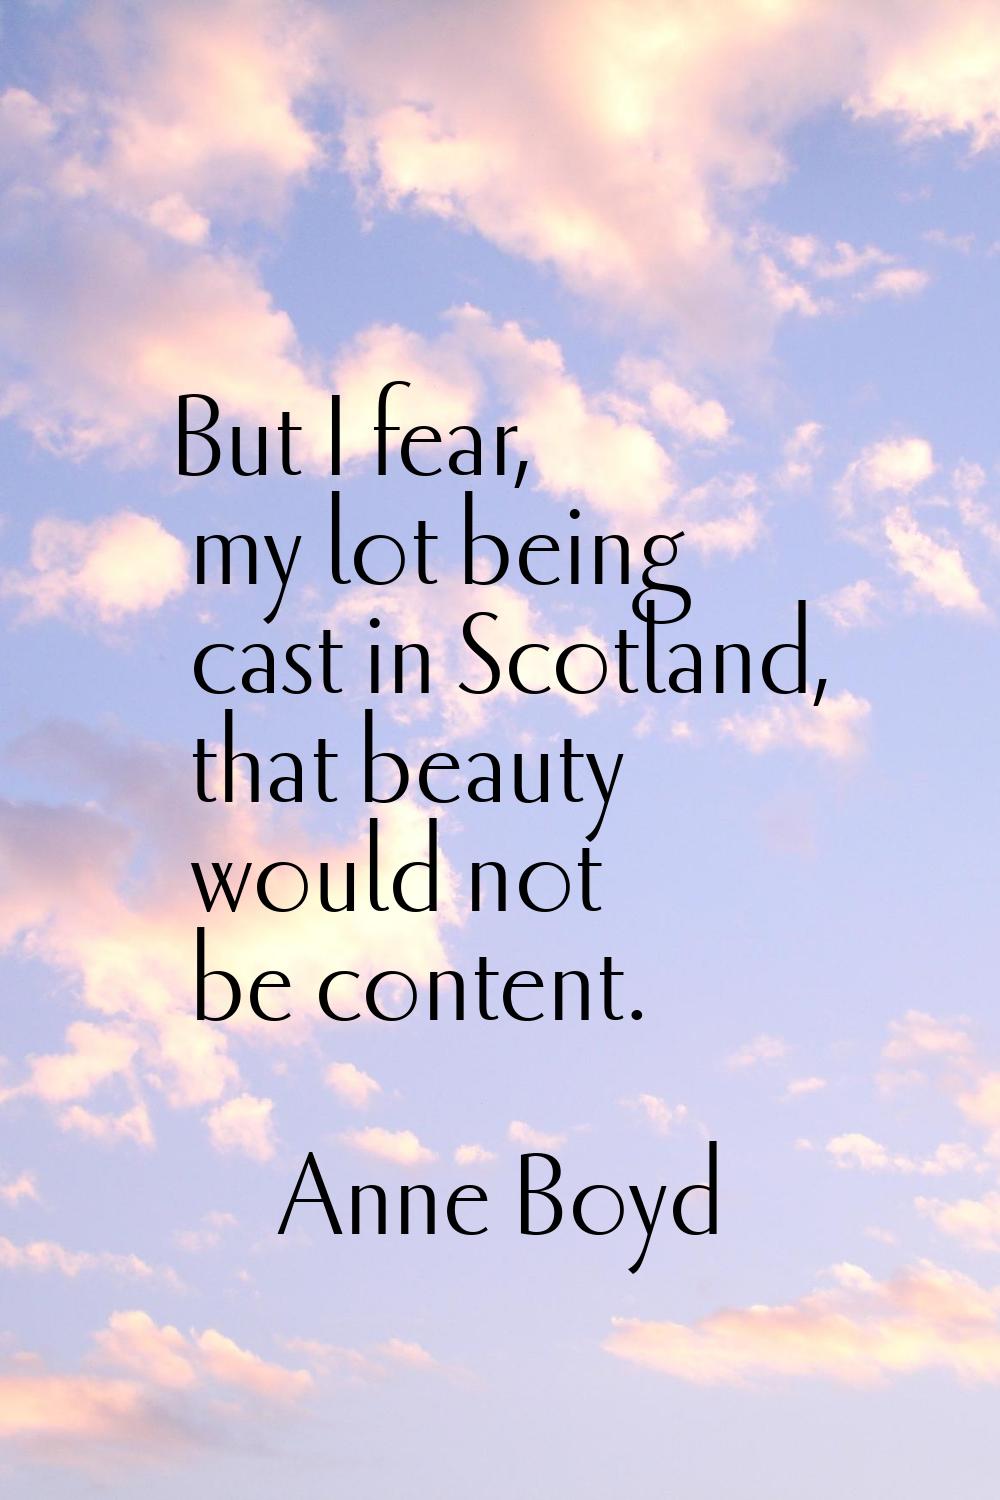 But I fear, my lot being cast in Scotland, that beauty would not be content.